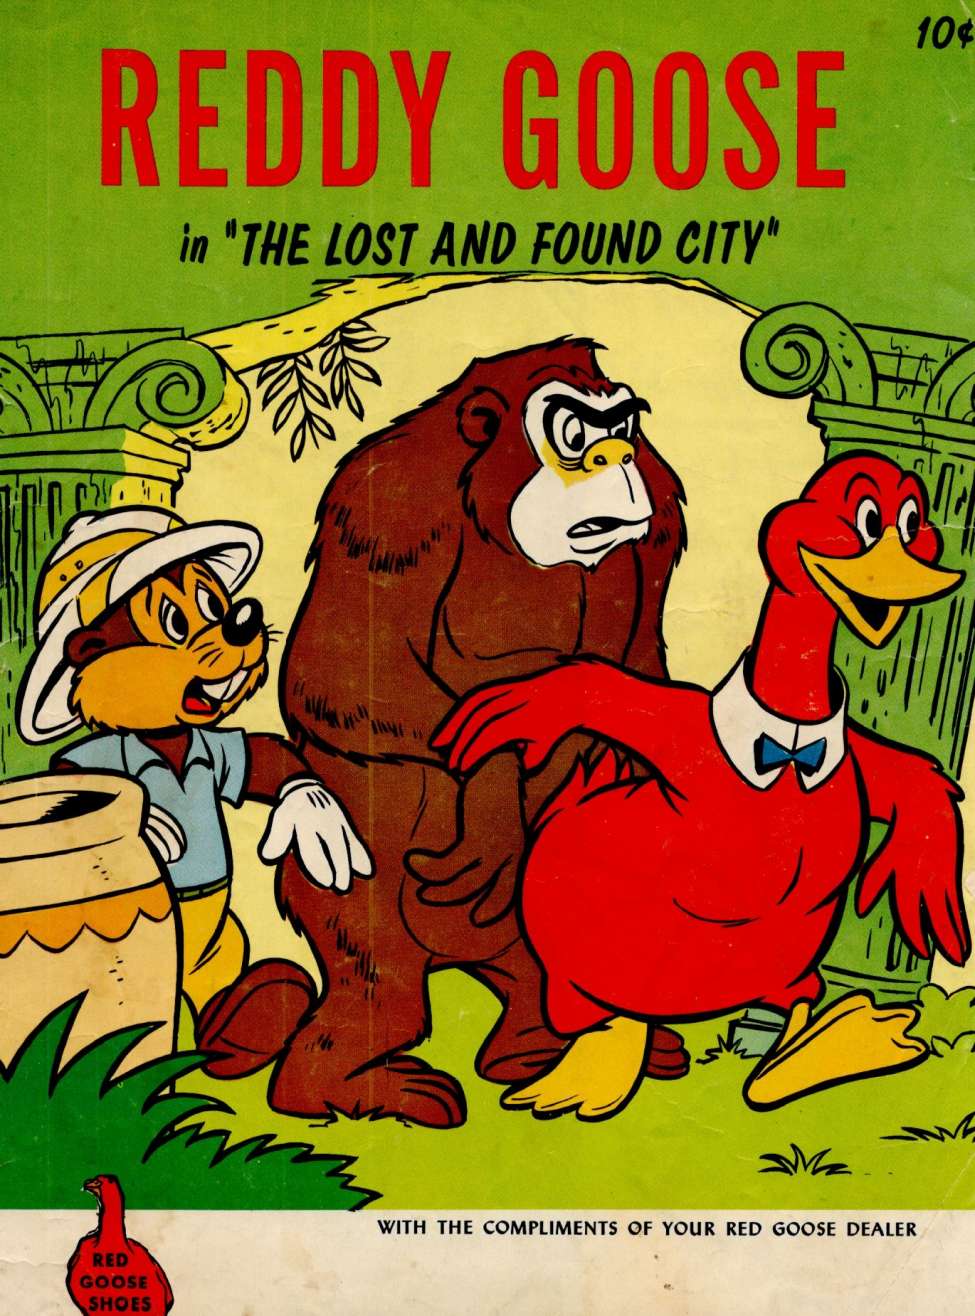 Book Cover For Reddy Goose 3 - The Lost and Found City